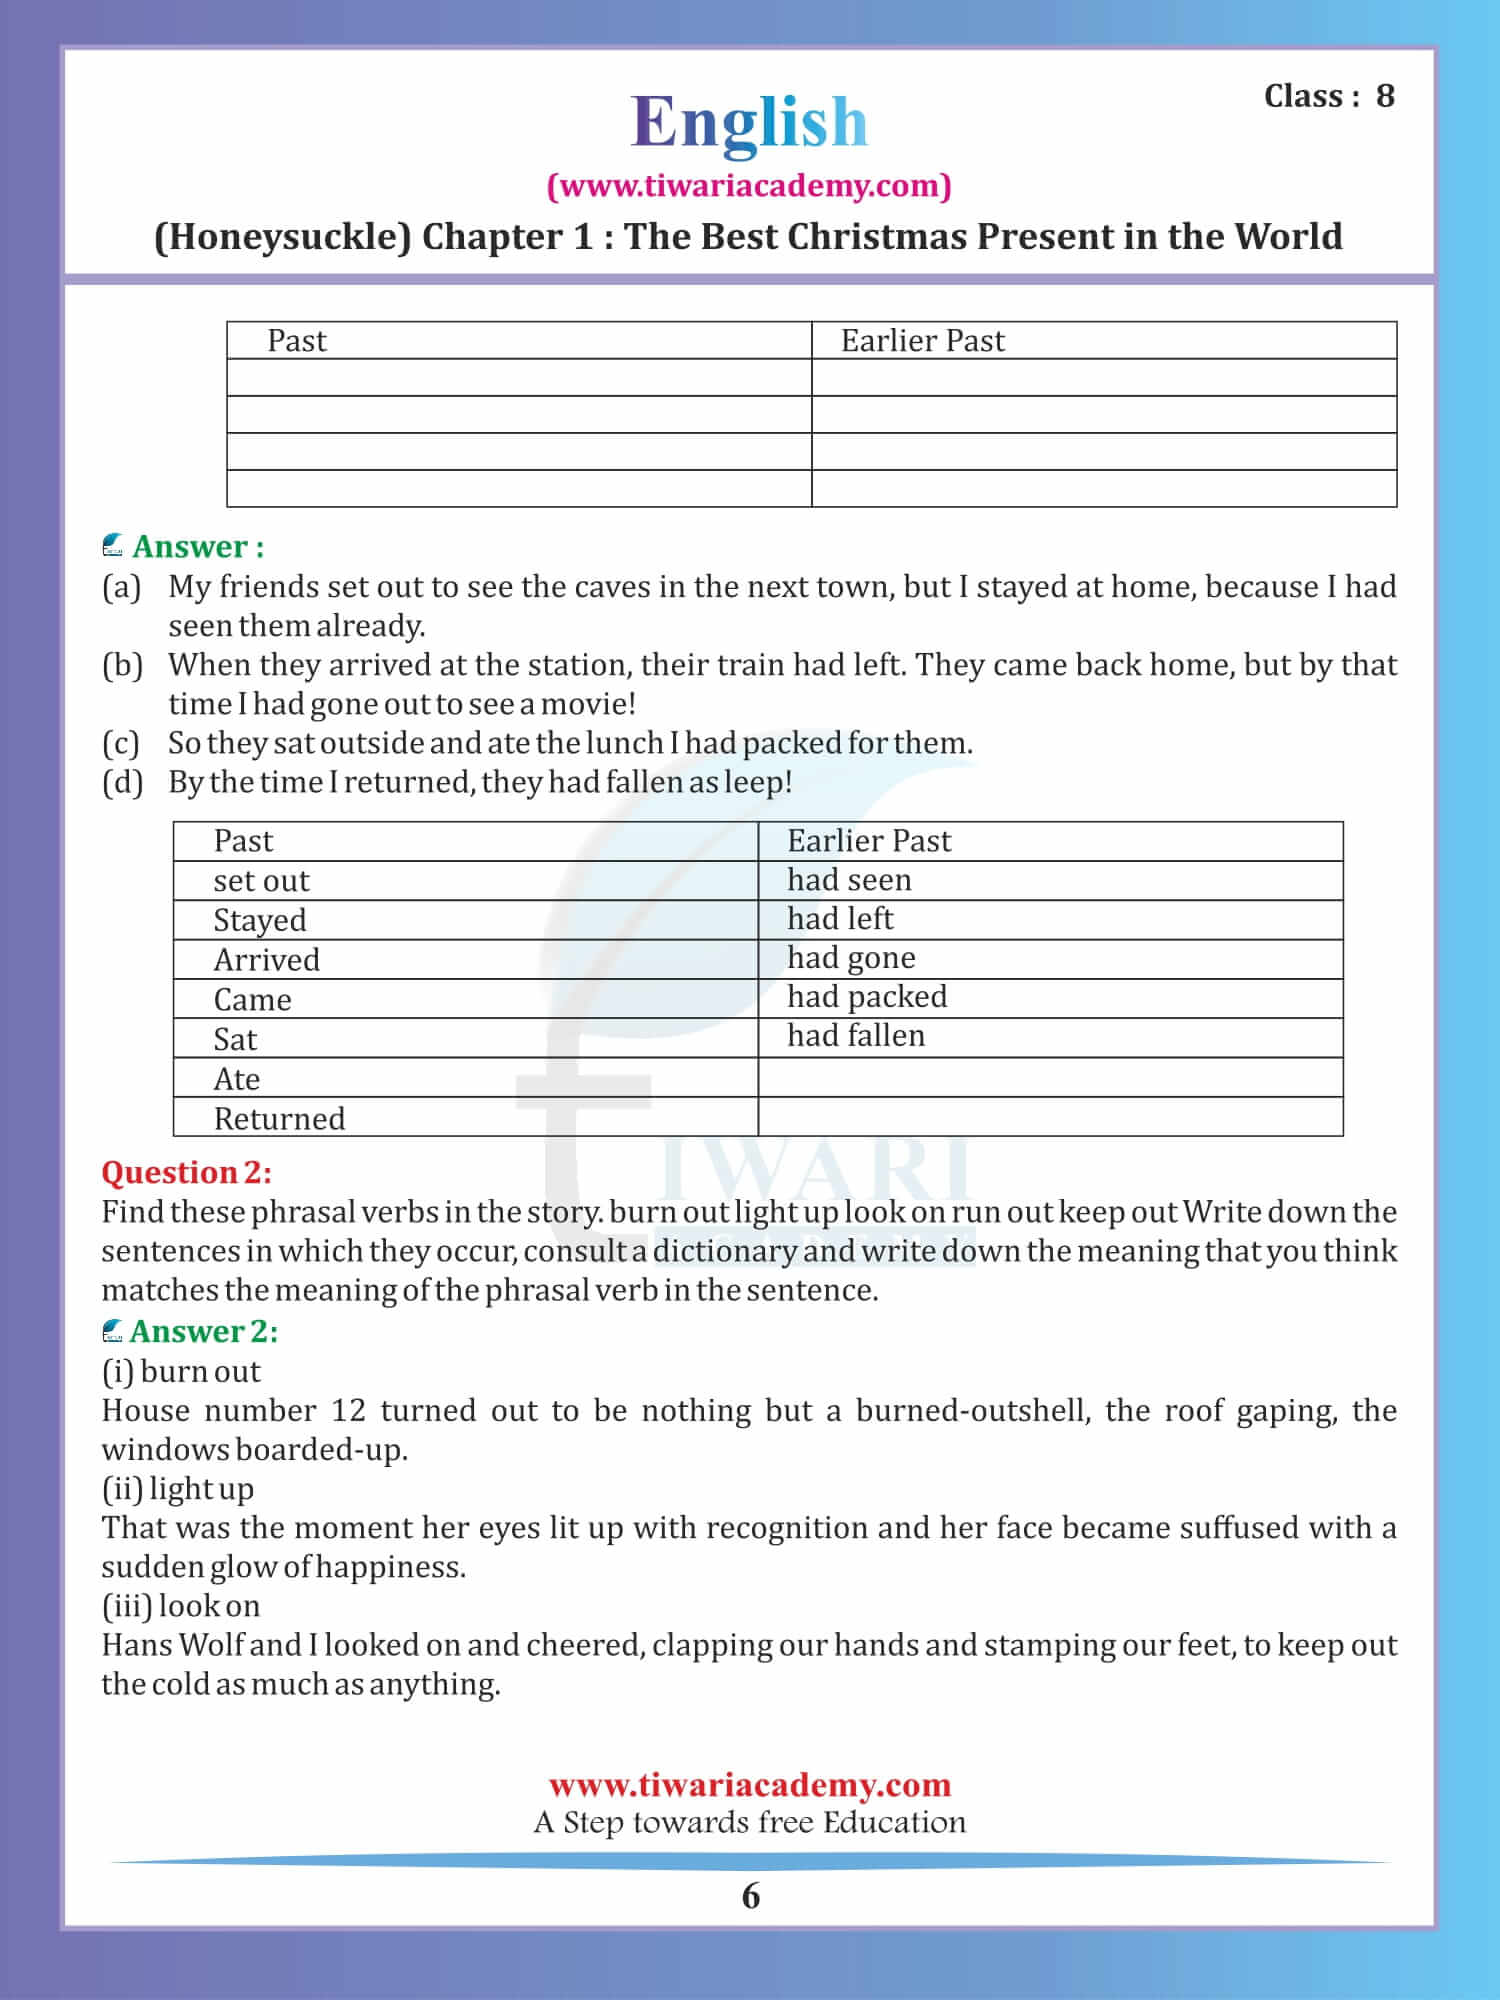 Class 8 English Honeydew Chapter 1 all answers